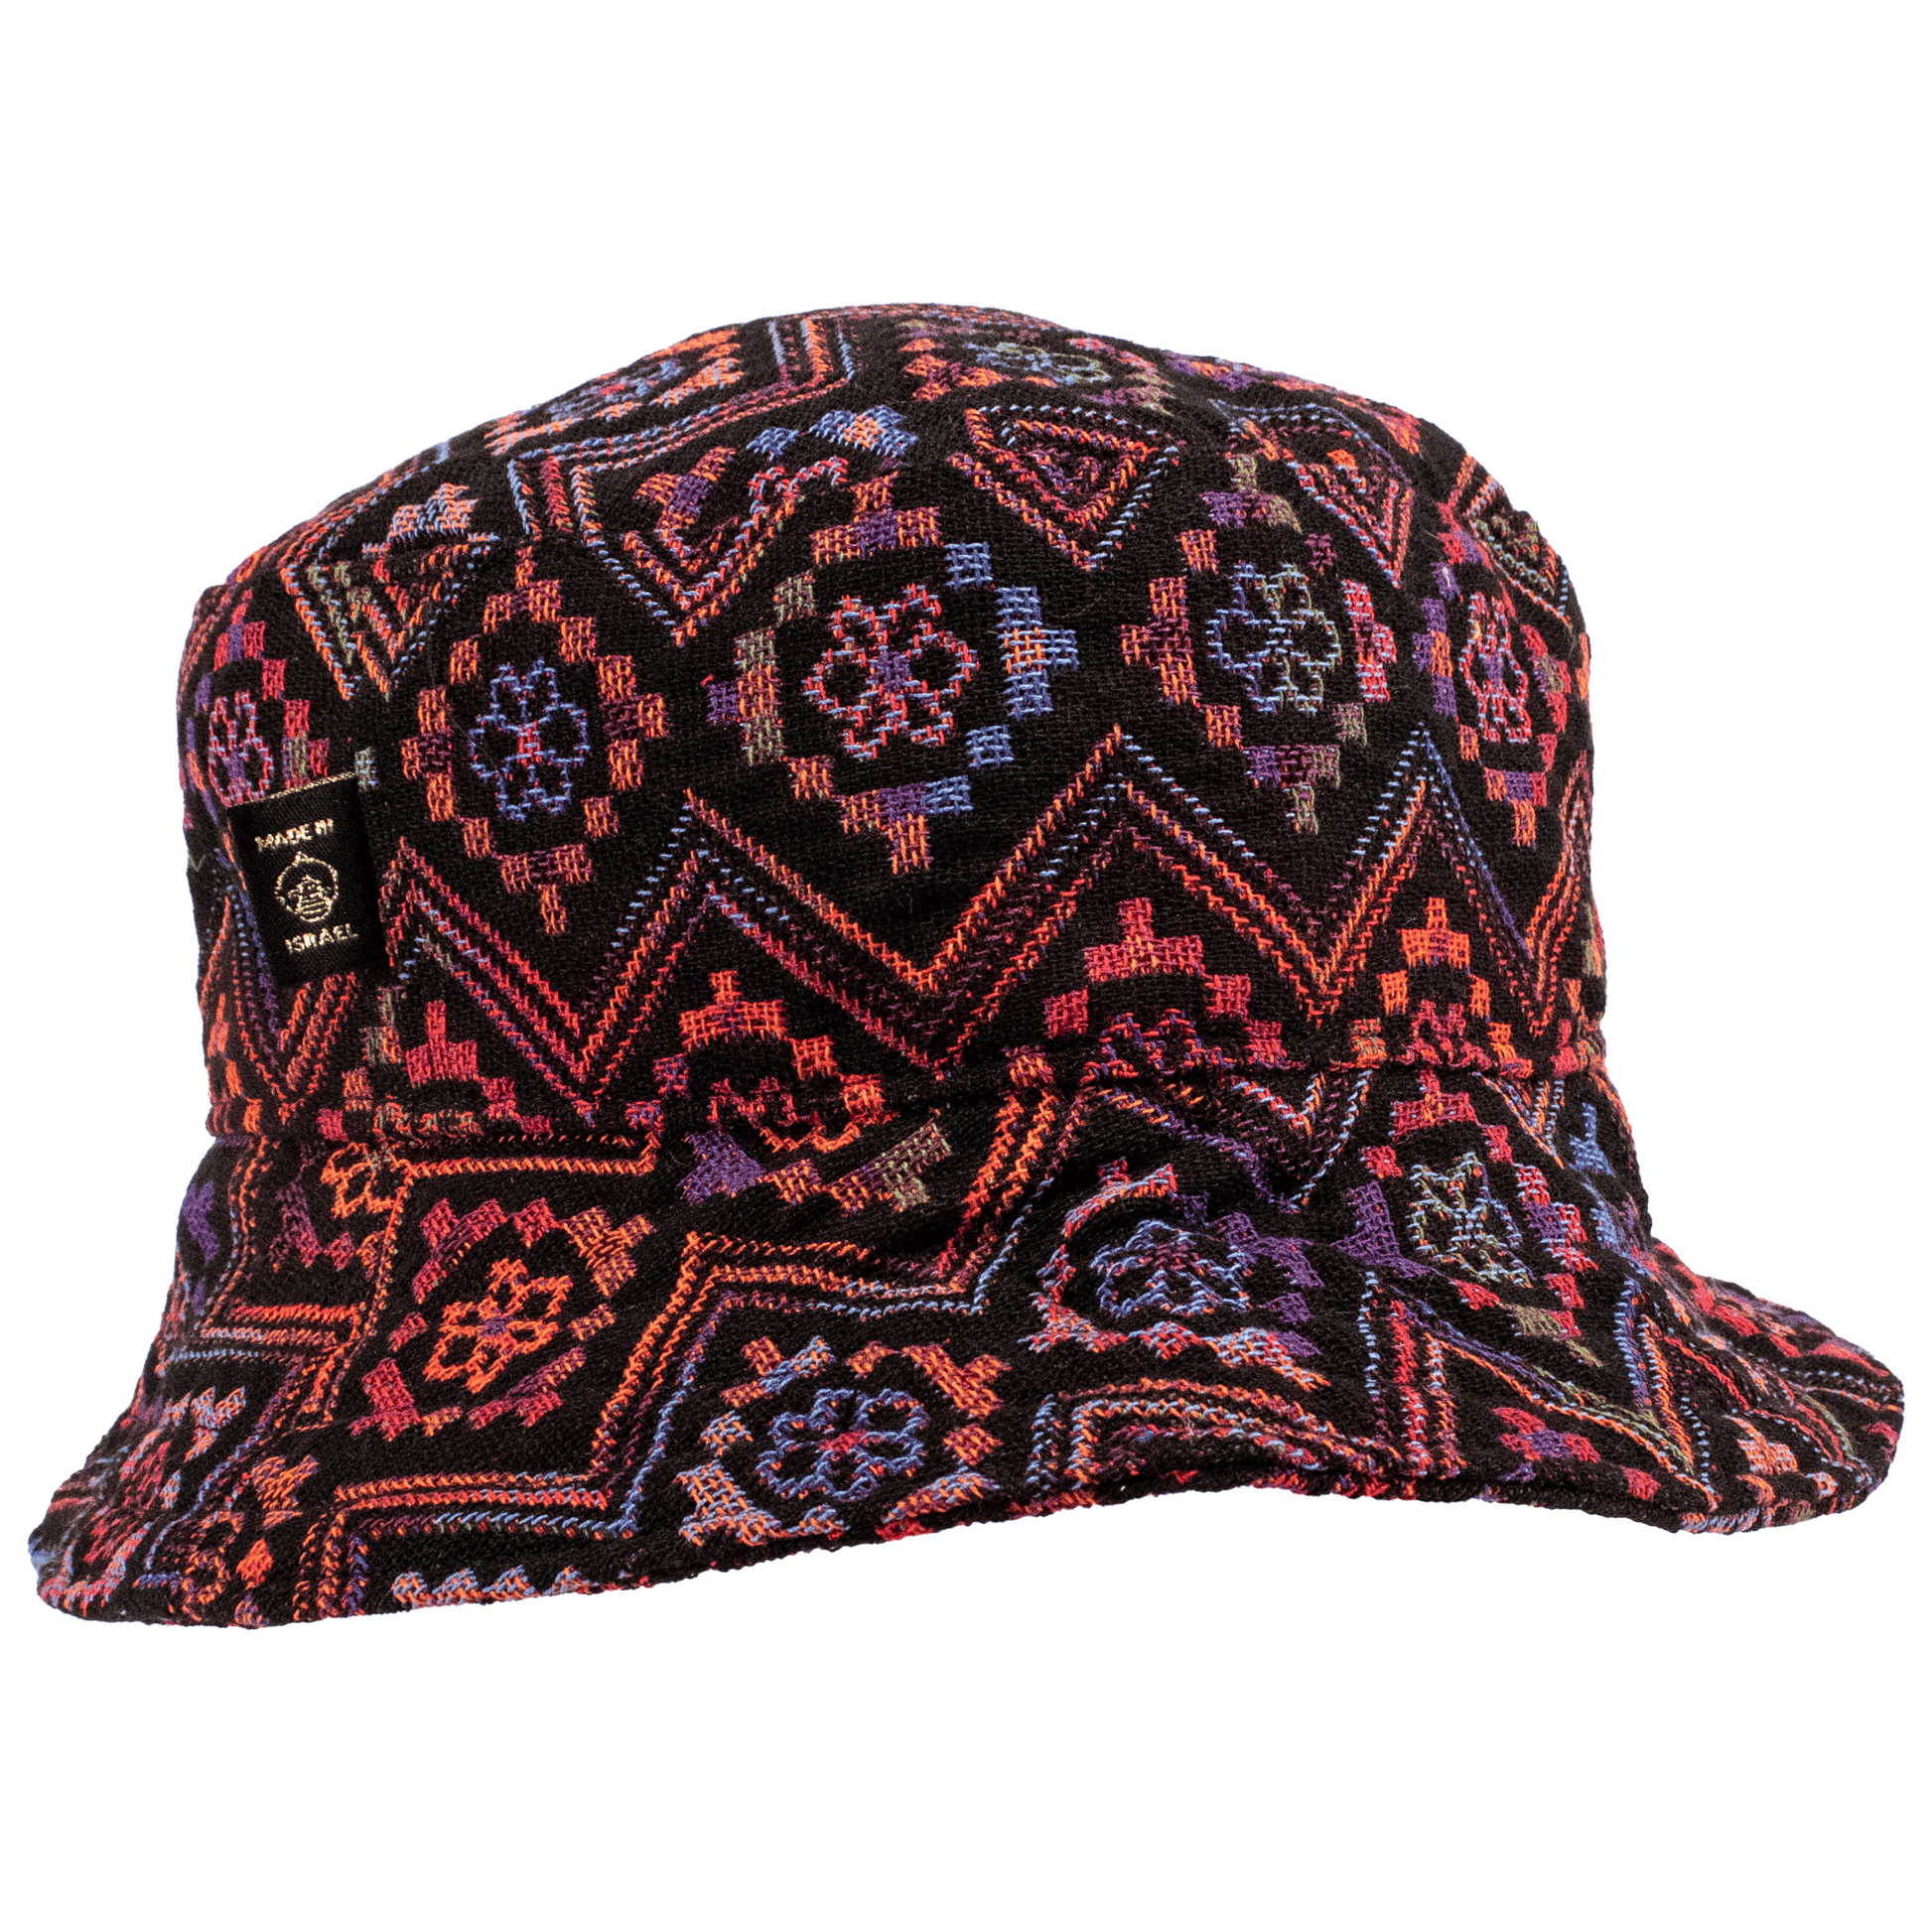 Black bucket hat with vibrant colorful geo floral pattern